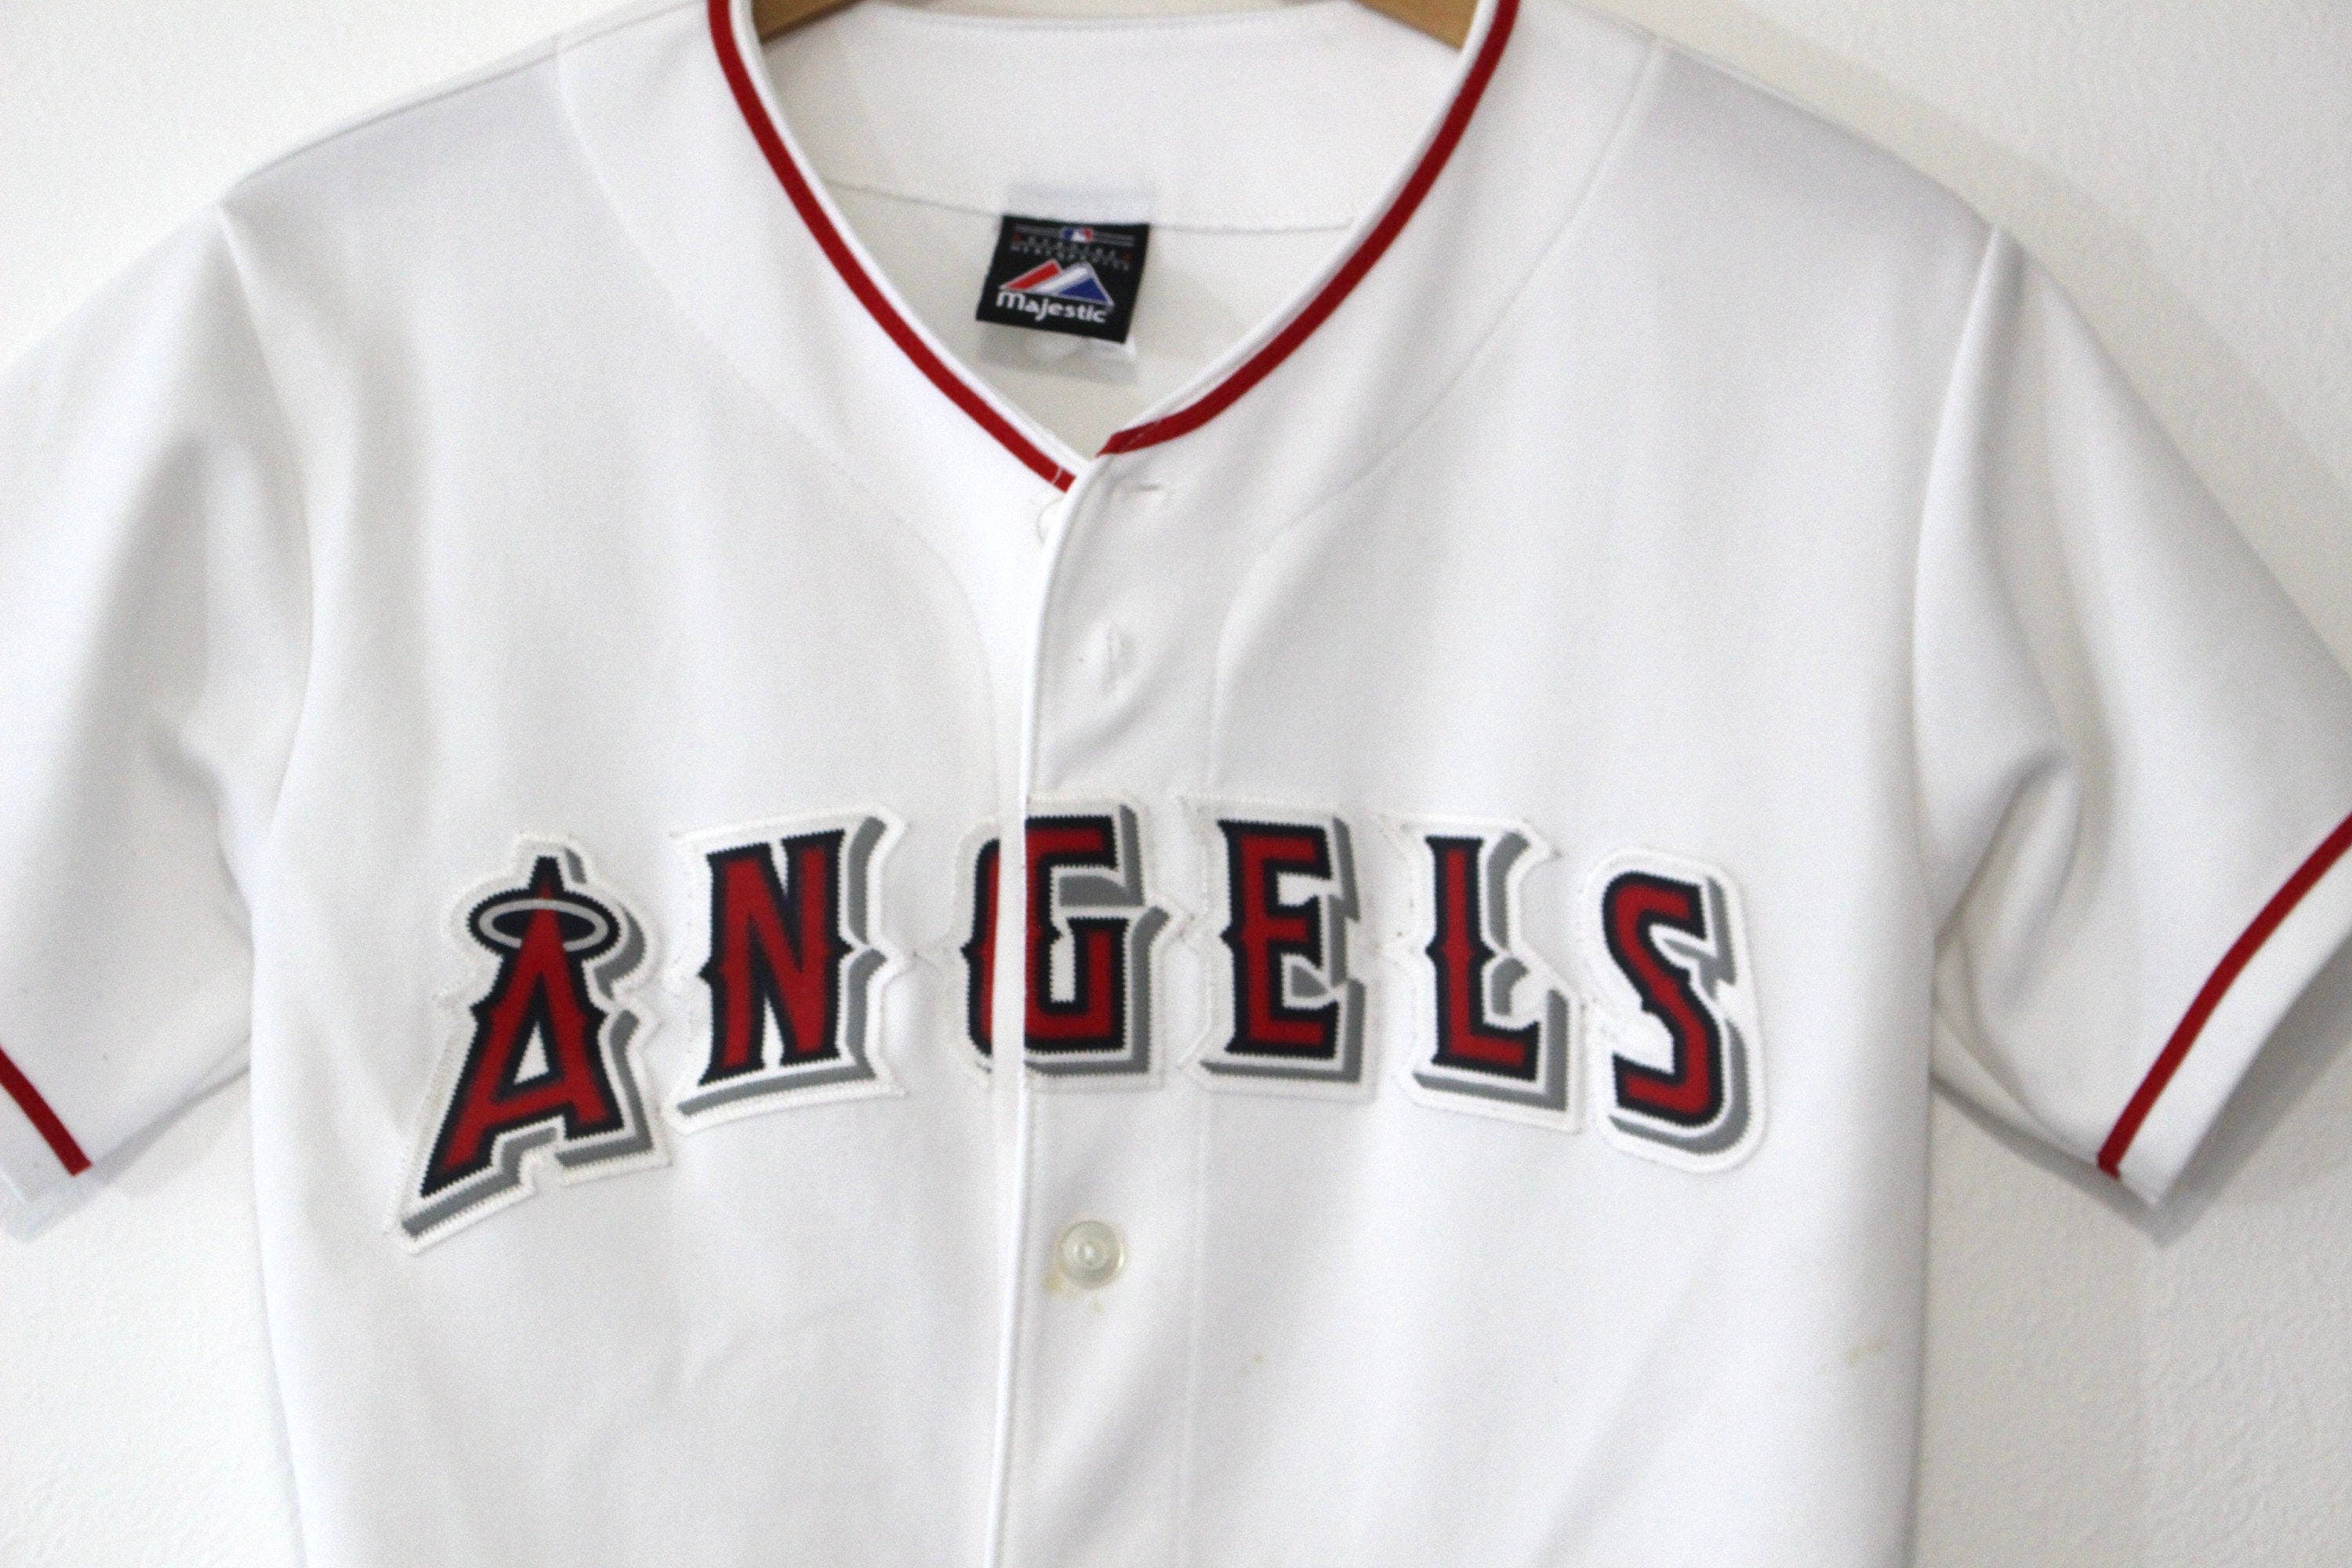 Vintage Buttoned Blue Anaheim Angels Baseball Jersey by Majestic